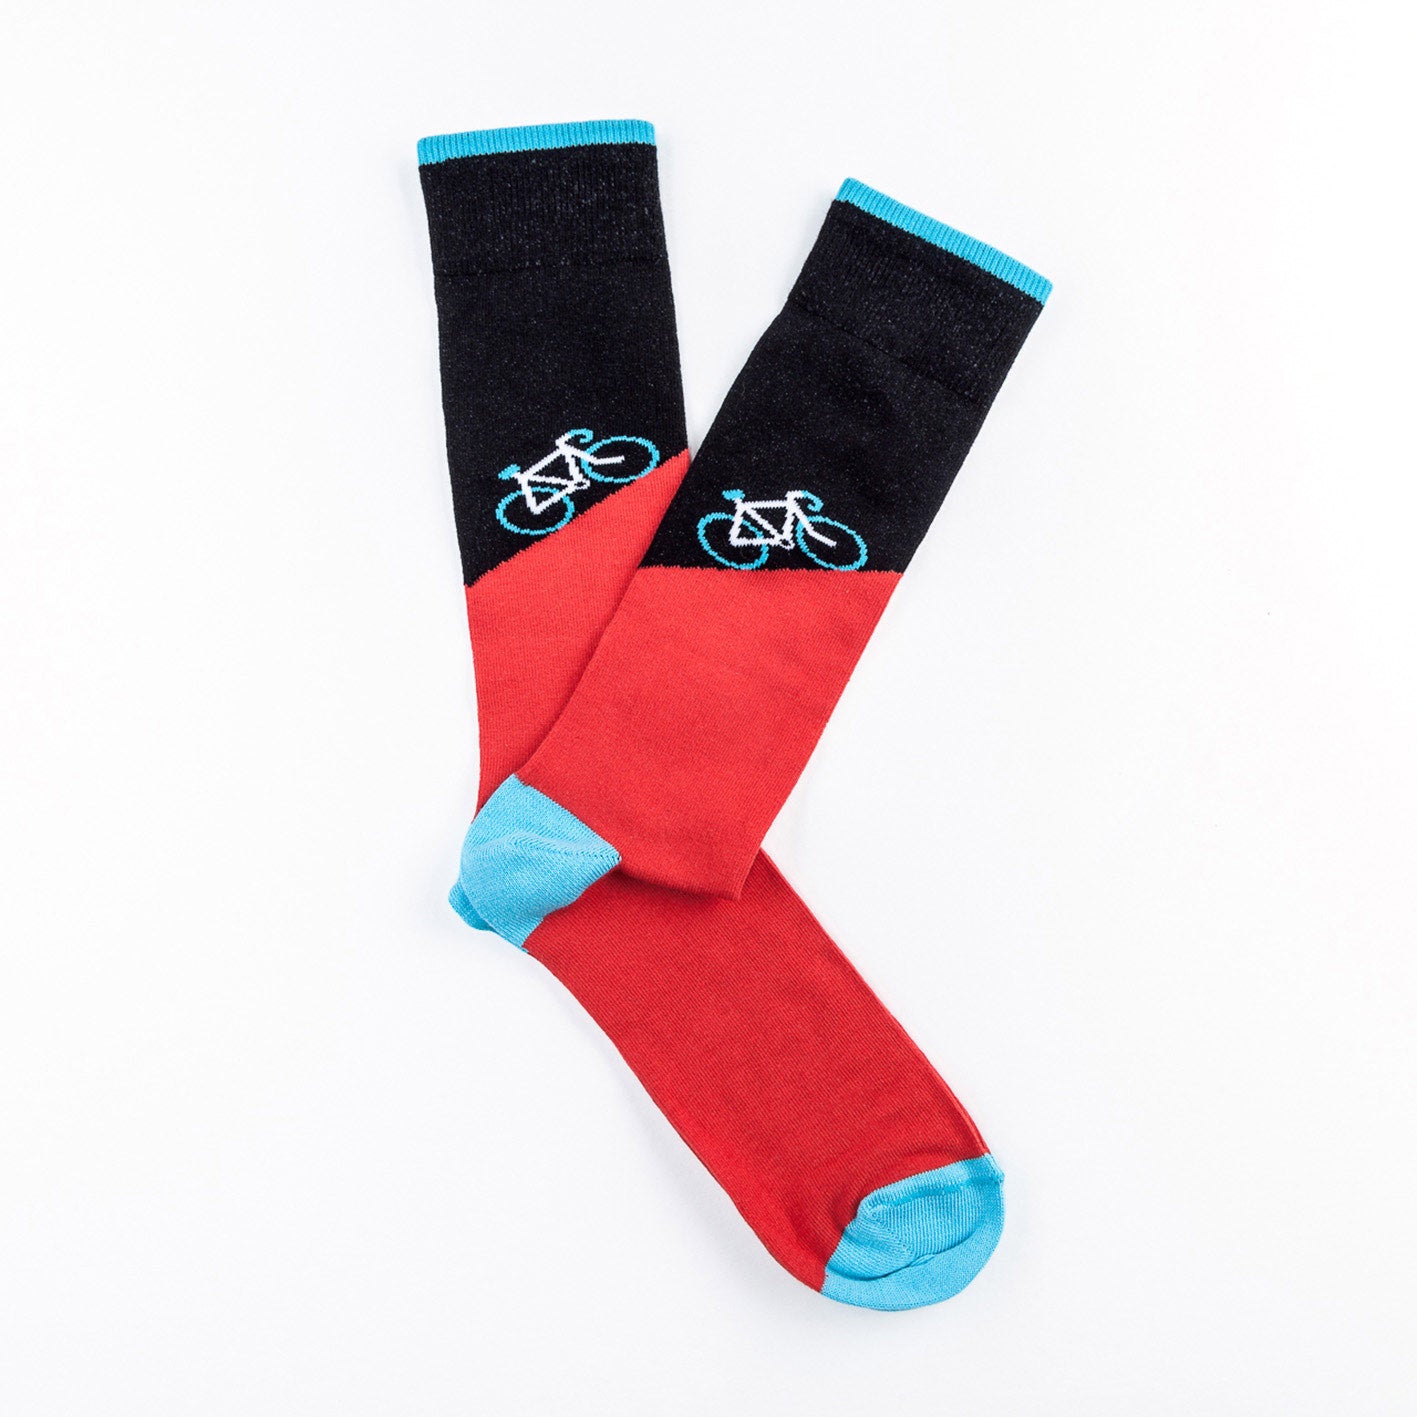 Giraffe Cool | Black And Blue With White Bicycles Brushed Cotton Socks open